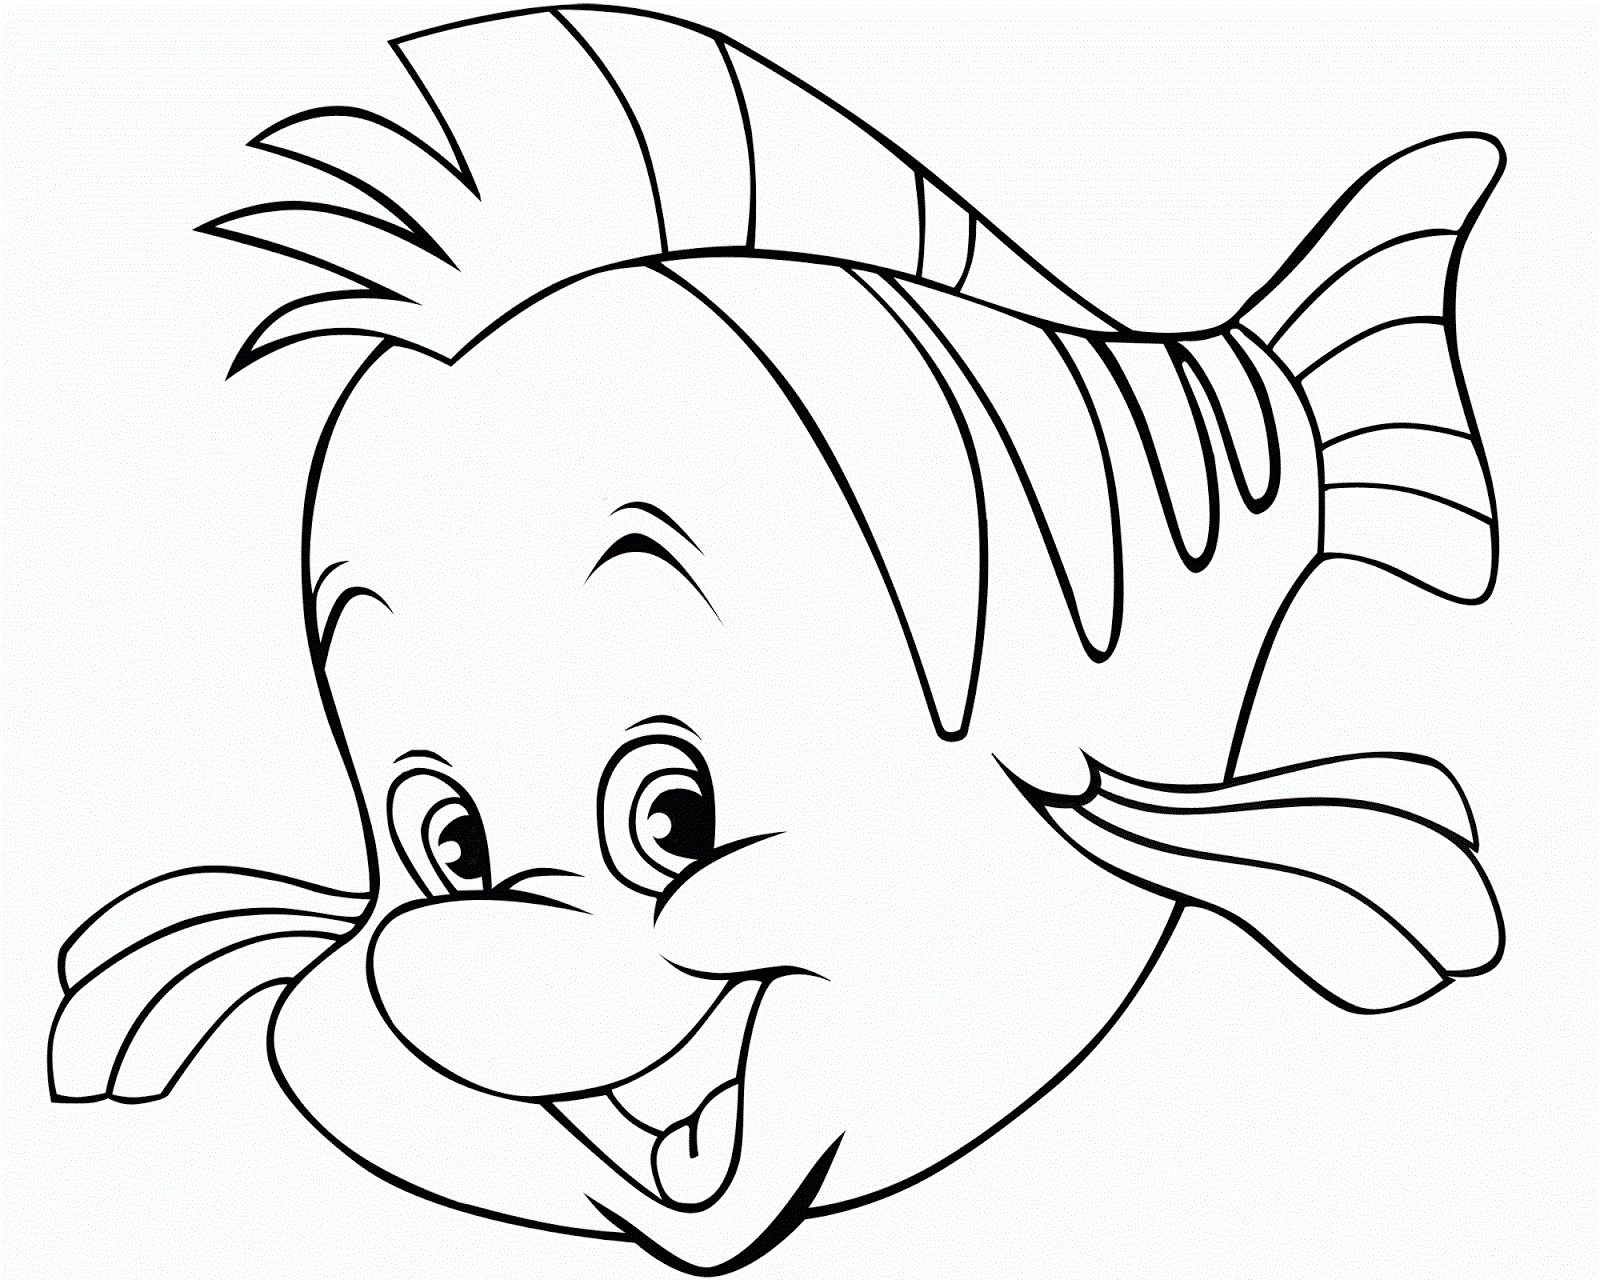 Fish Coloring Pages | Fotolip.com Rich image and wallpaper